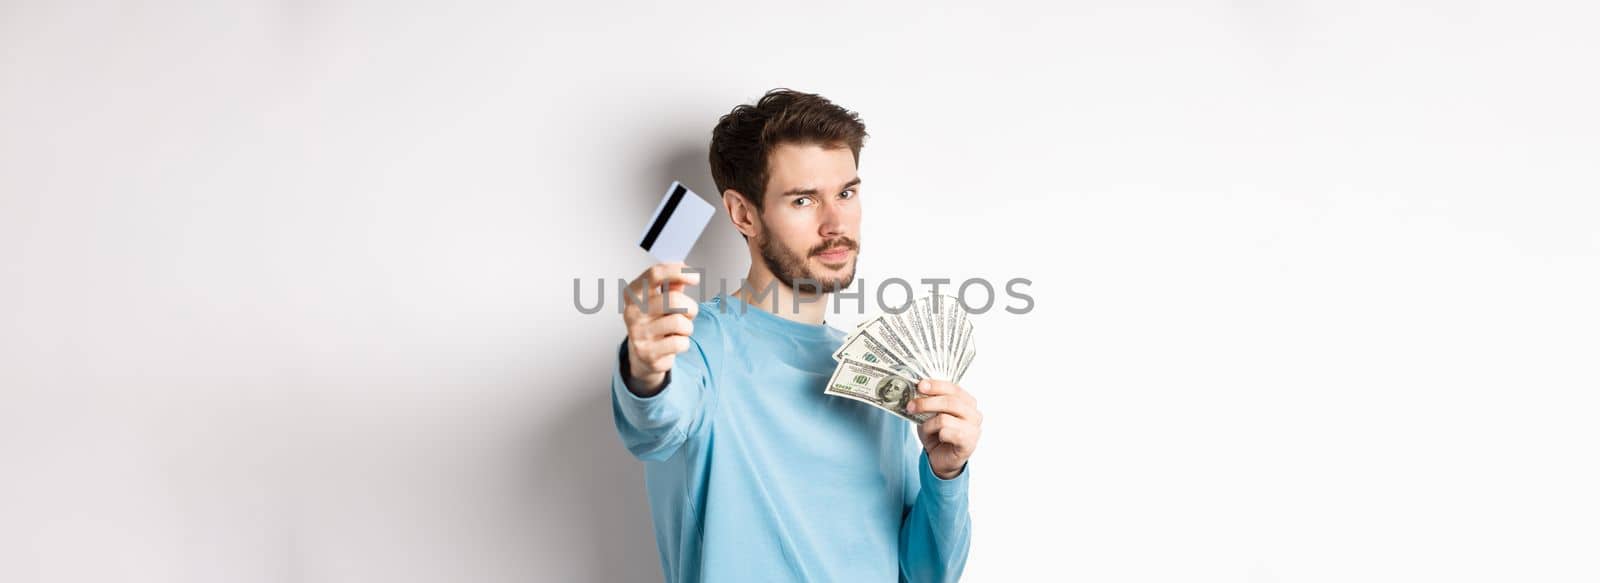 Serious-looking guy stretch out hand with plastic credit card, prefer contactless payment instead of cash, standing on white background.